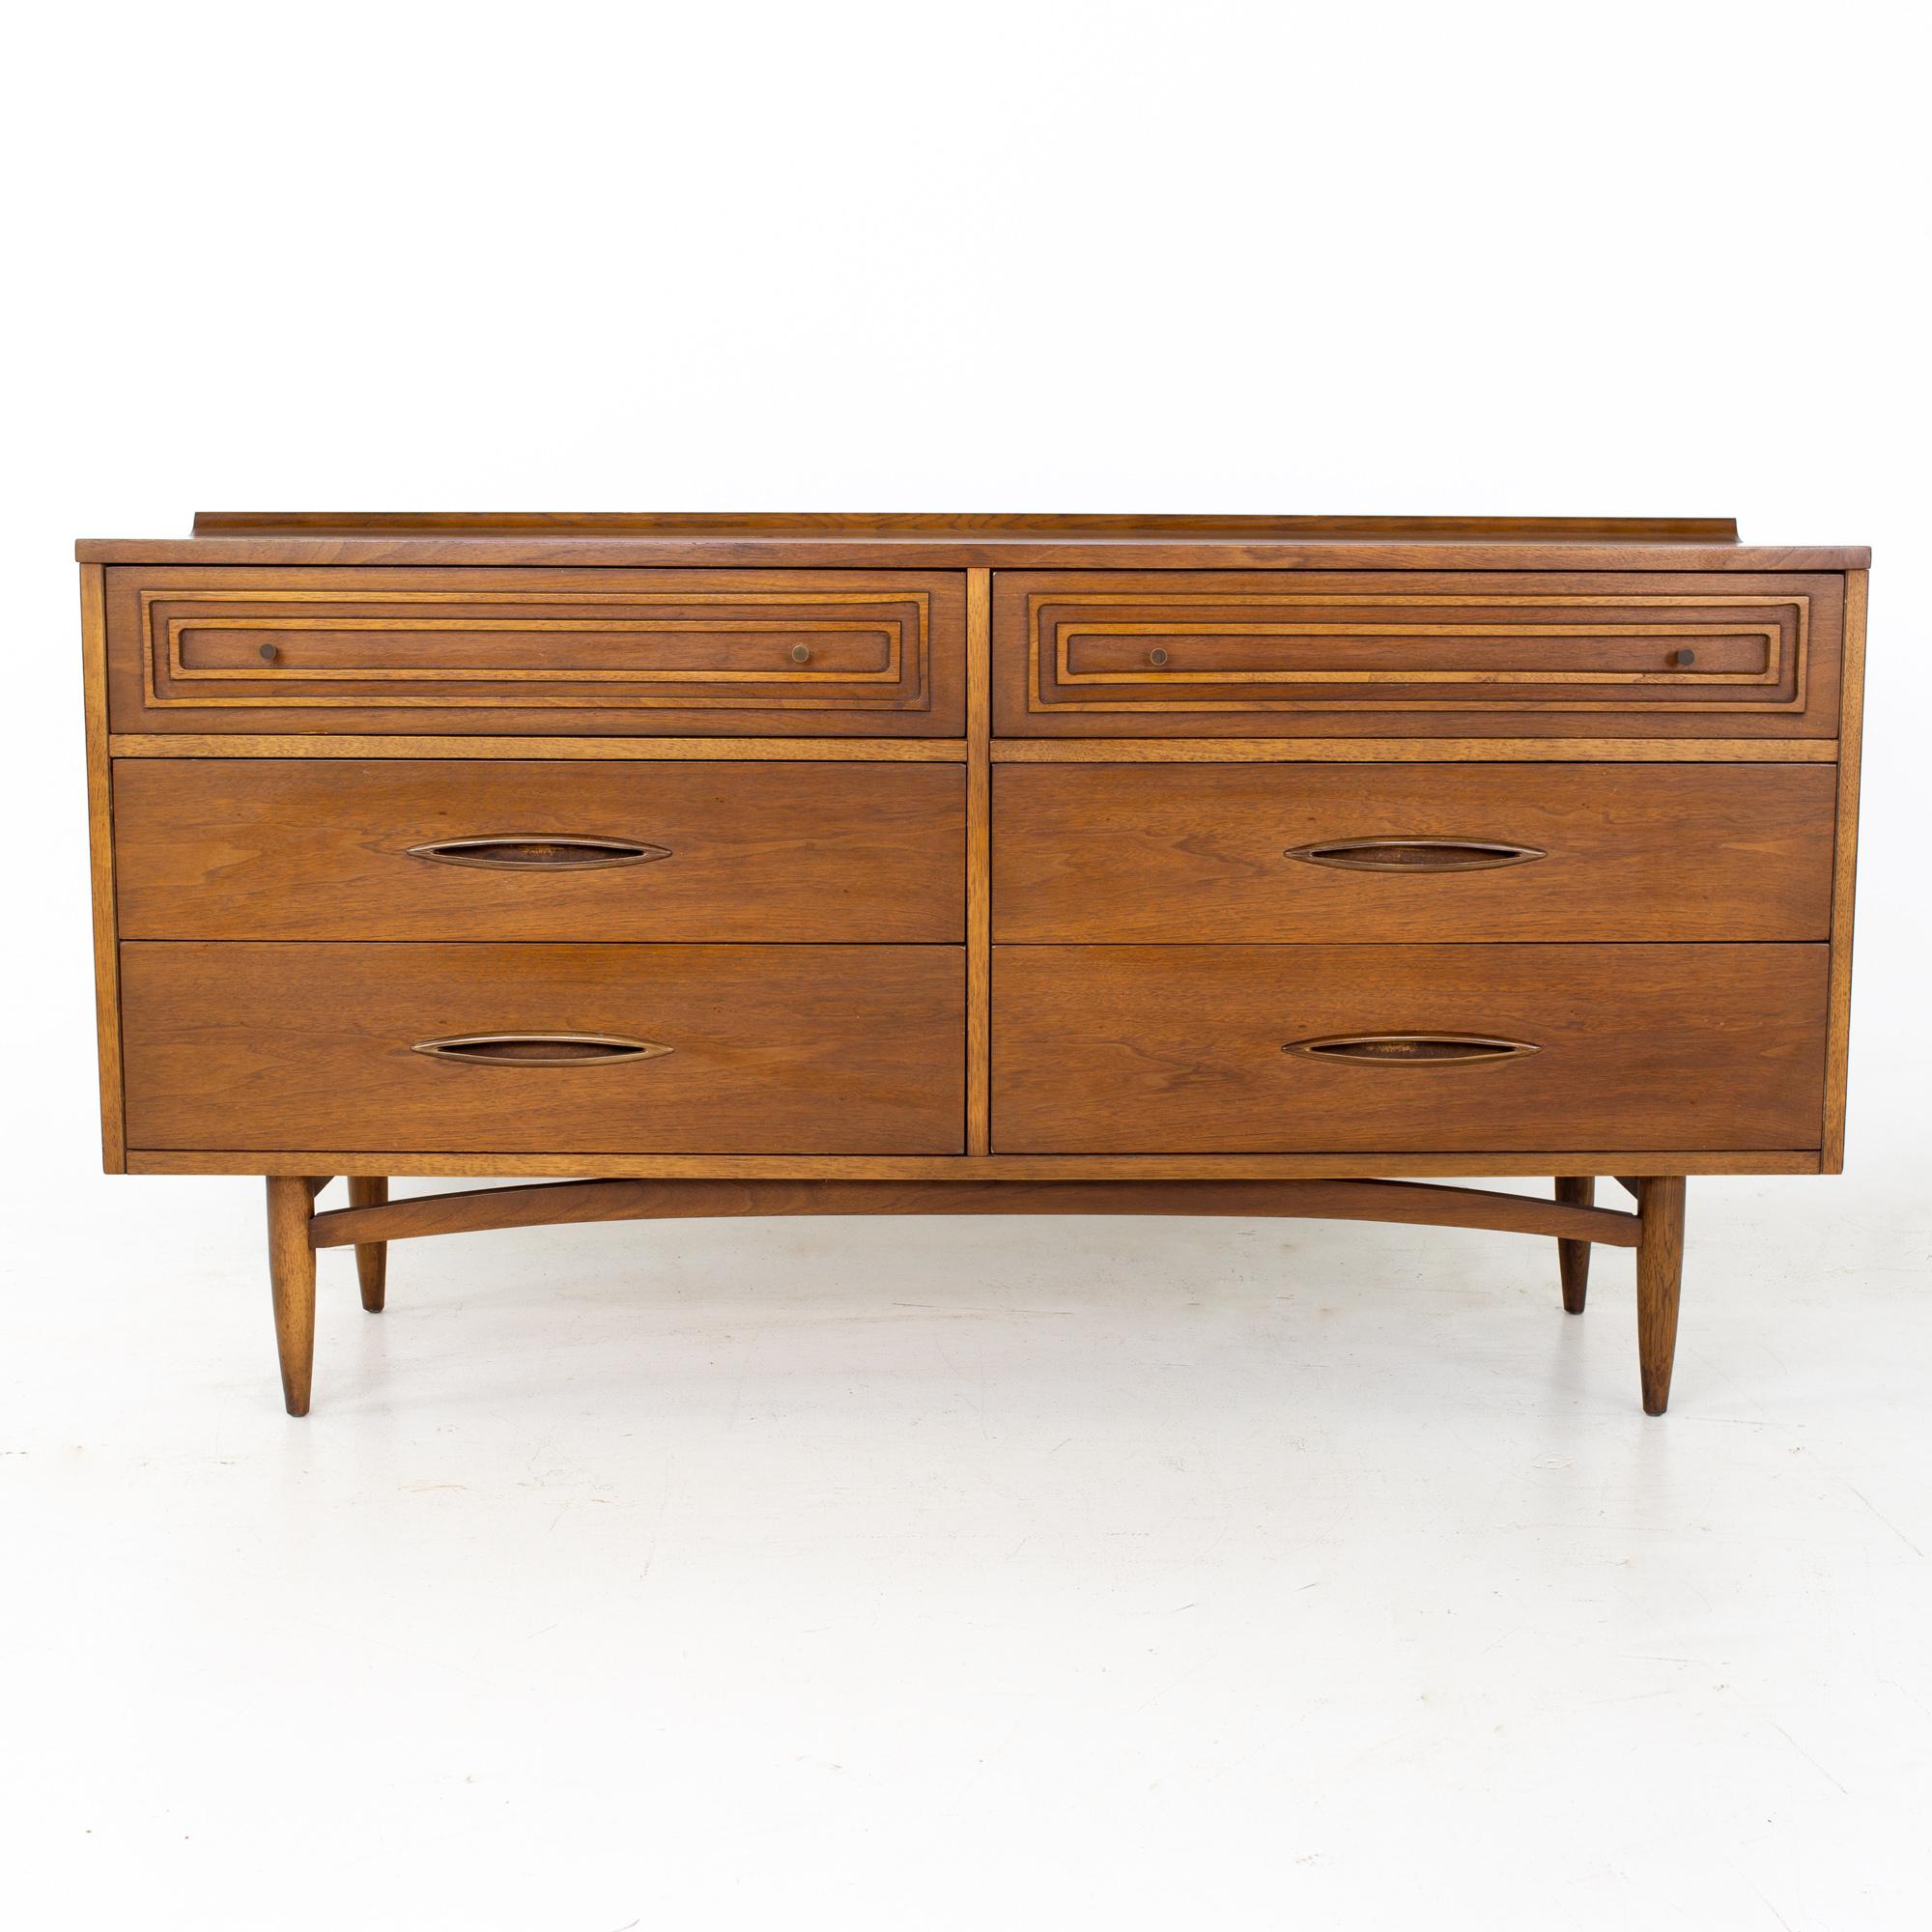 Broyhill sculptra mid century 6 drawer lowboy dresser

Dresser measures: 60 wide x 17 deep x 31.5 inches high

All pieces of furniture can be had in what we call restored vintage condition. That means the piece is restored upon purchase so it’s